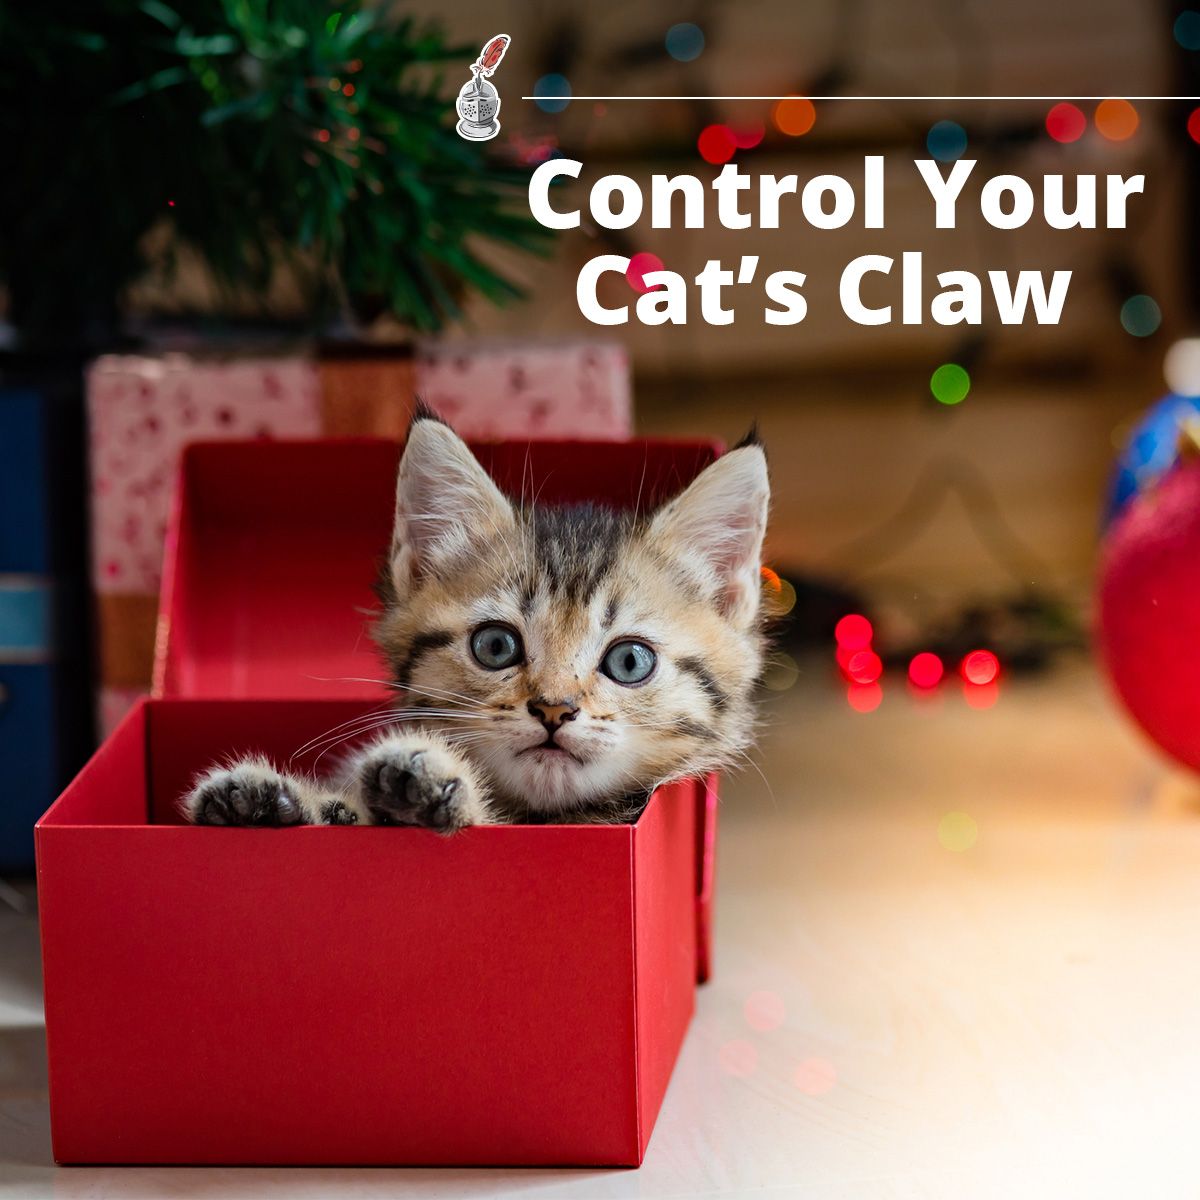 Control Your Cat's Claw